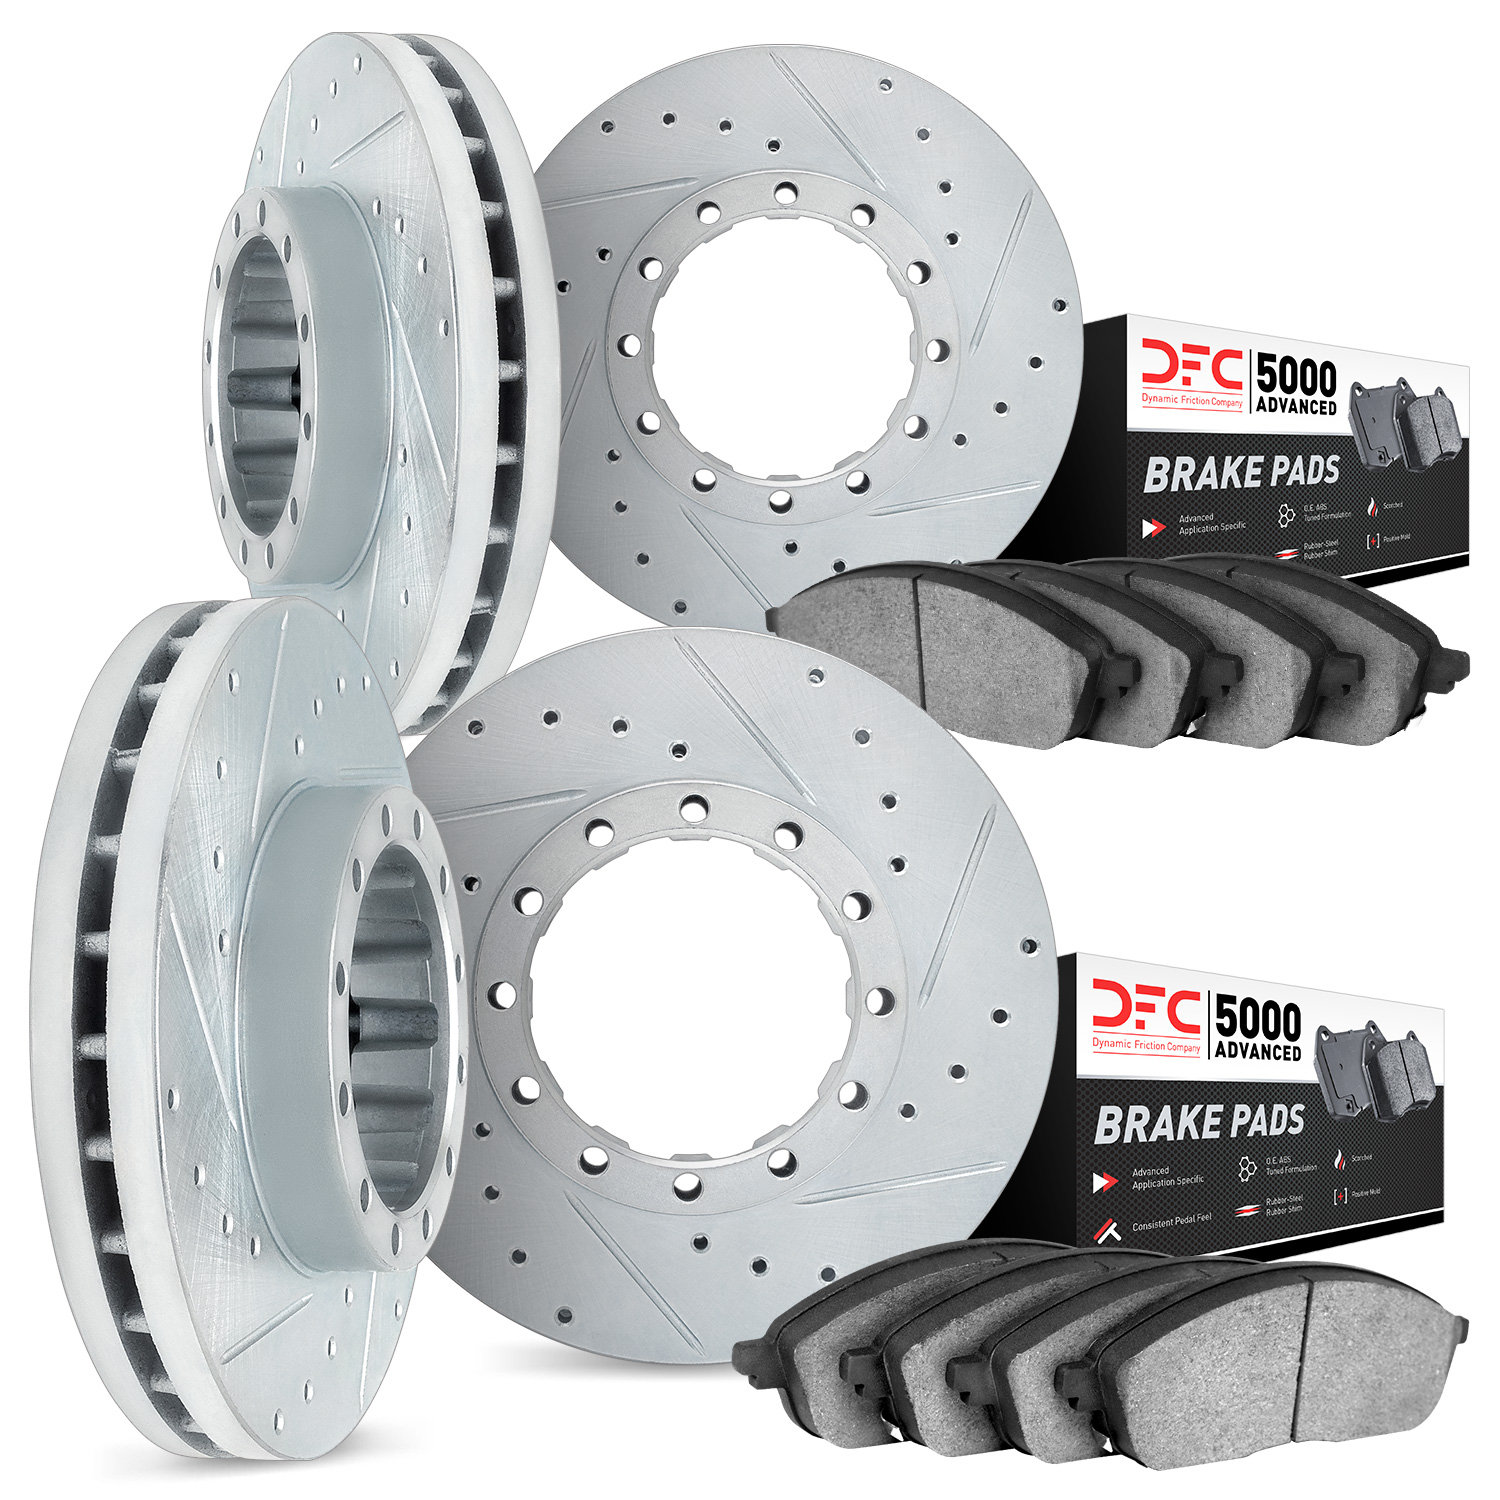 7504-72056 Drilled/Slotted Brake Rotors w/5000 Advanced Brake Pads Kit [Silver], 2010-2011 Freightliner, Position: Front and Rea